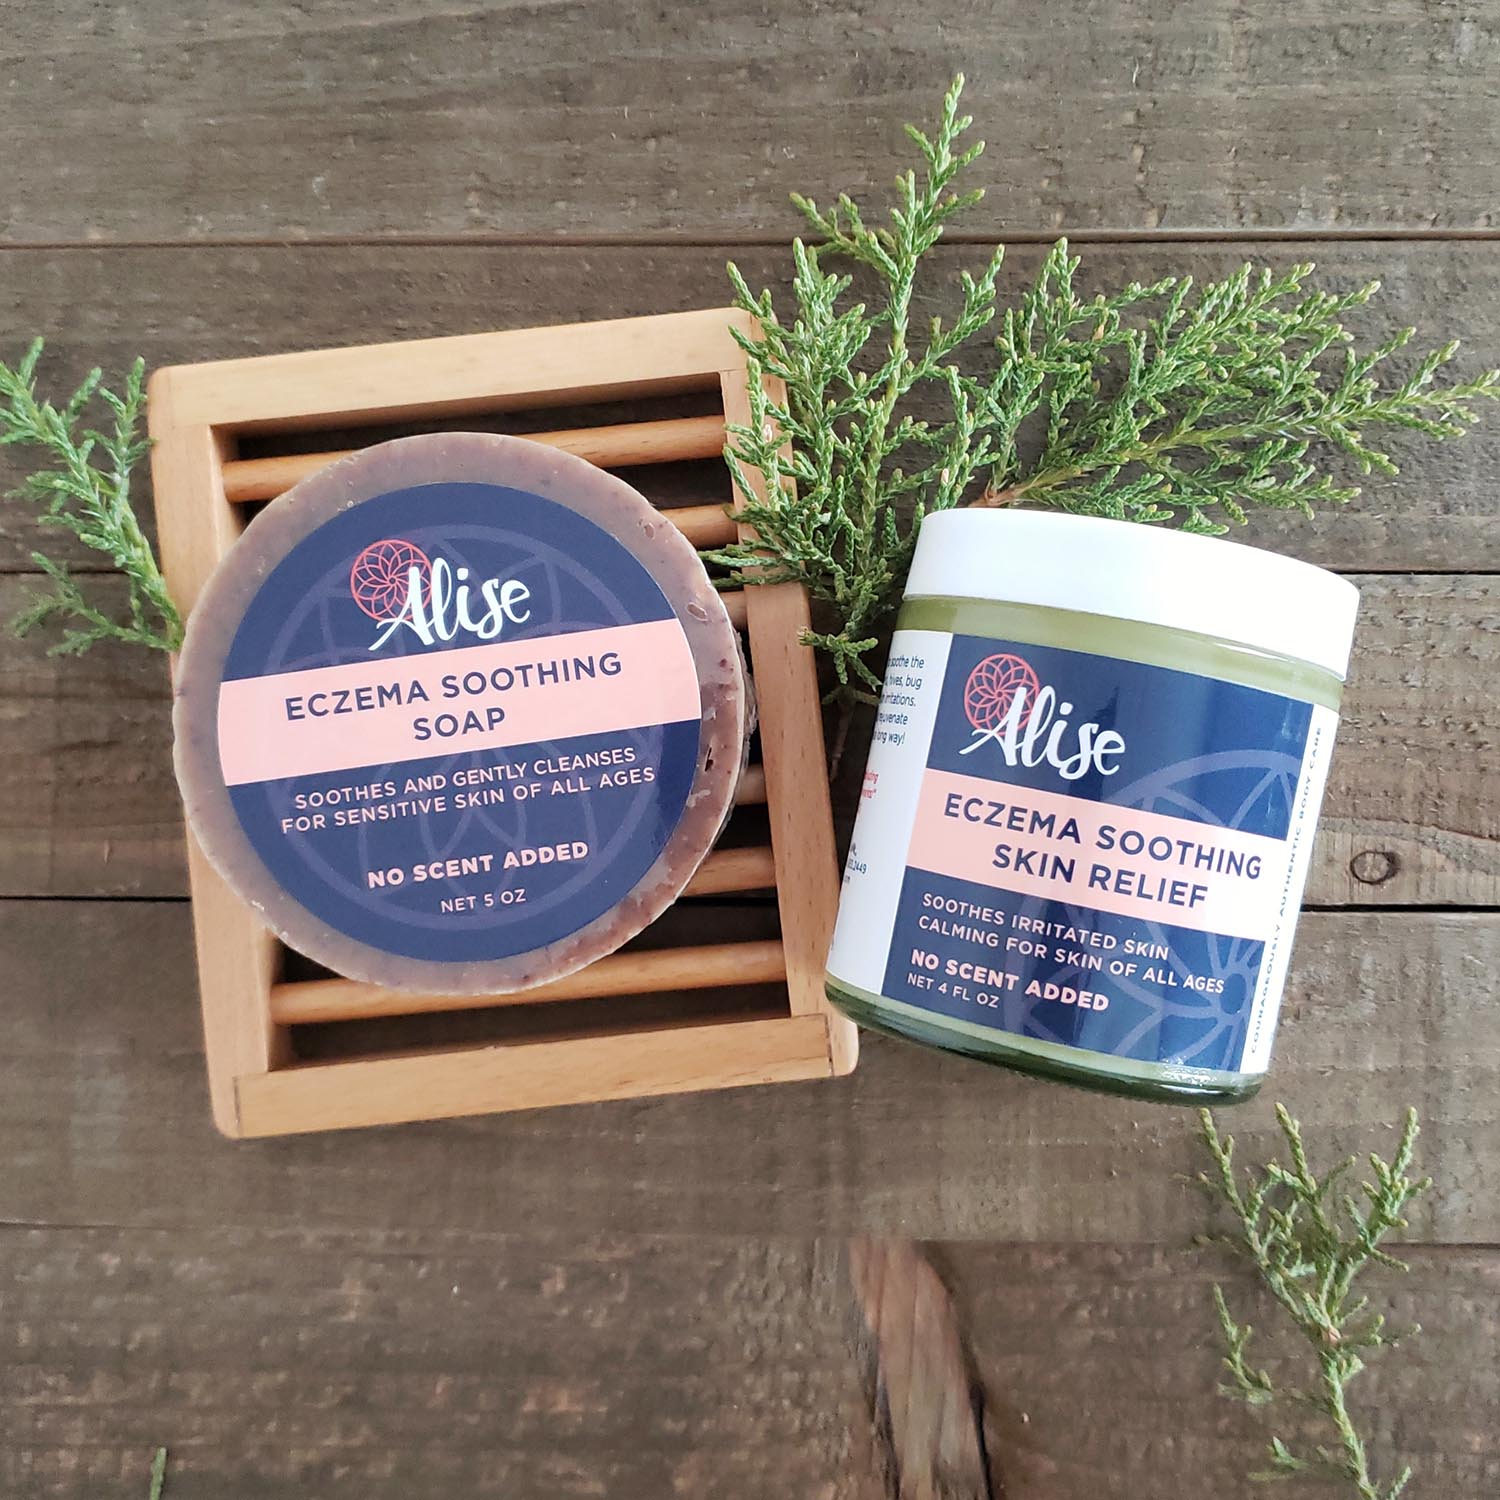 Eczema Soothing Skin Relief Salve .35oz Rub On handcrafted by Alise Body Care